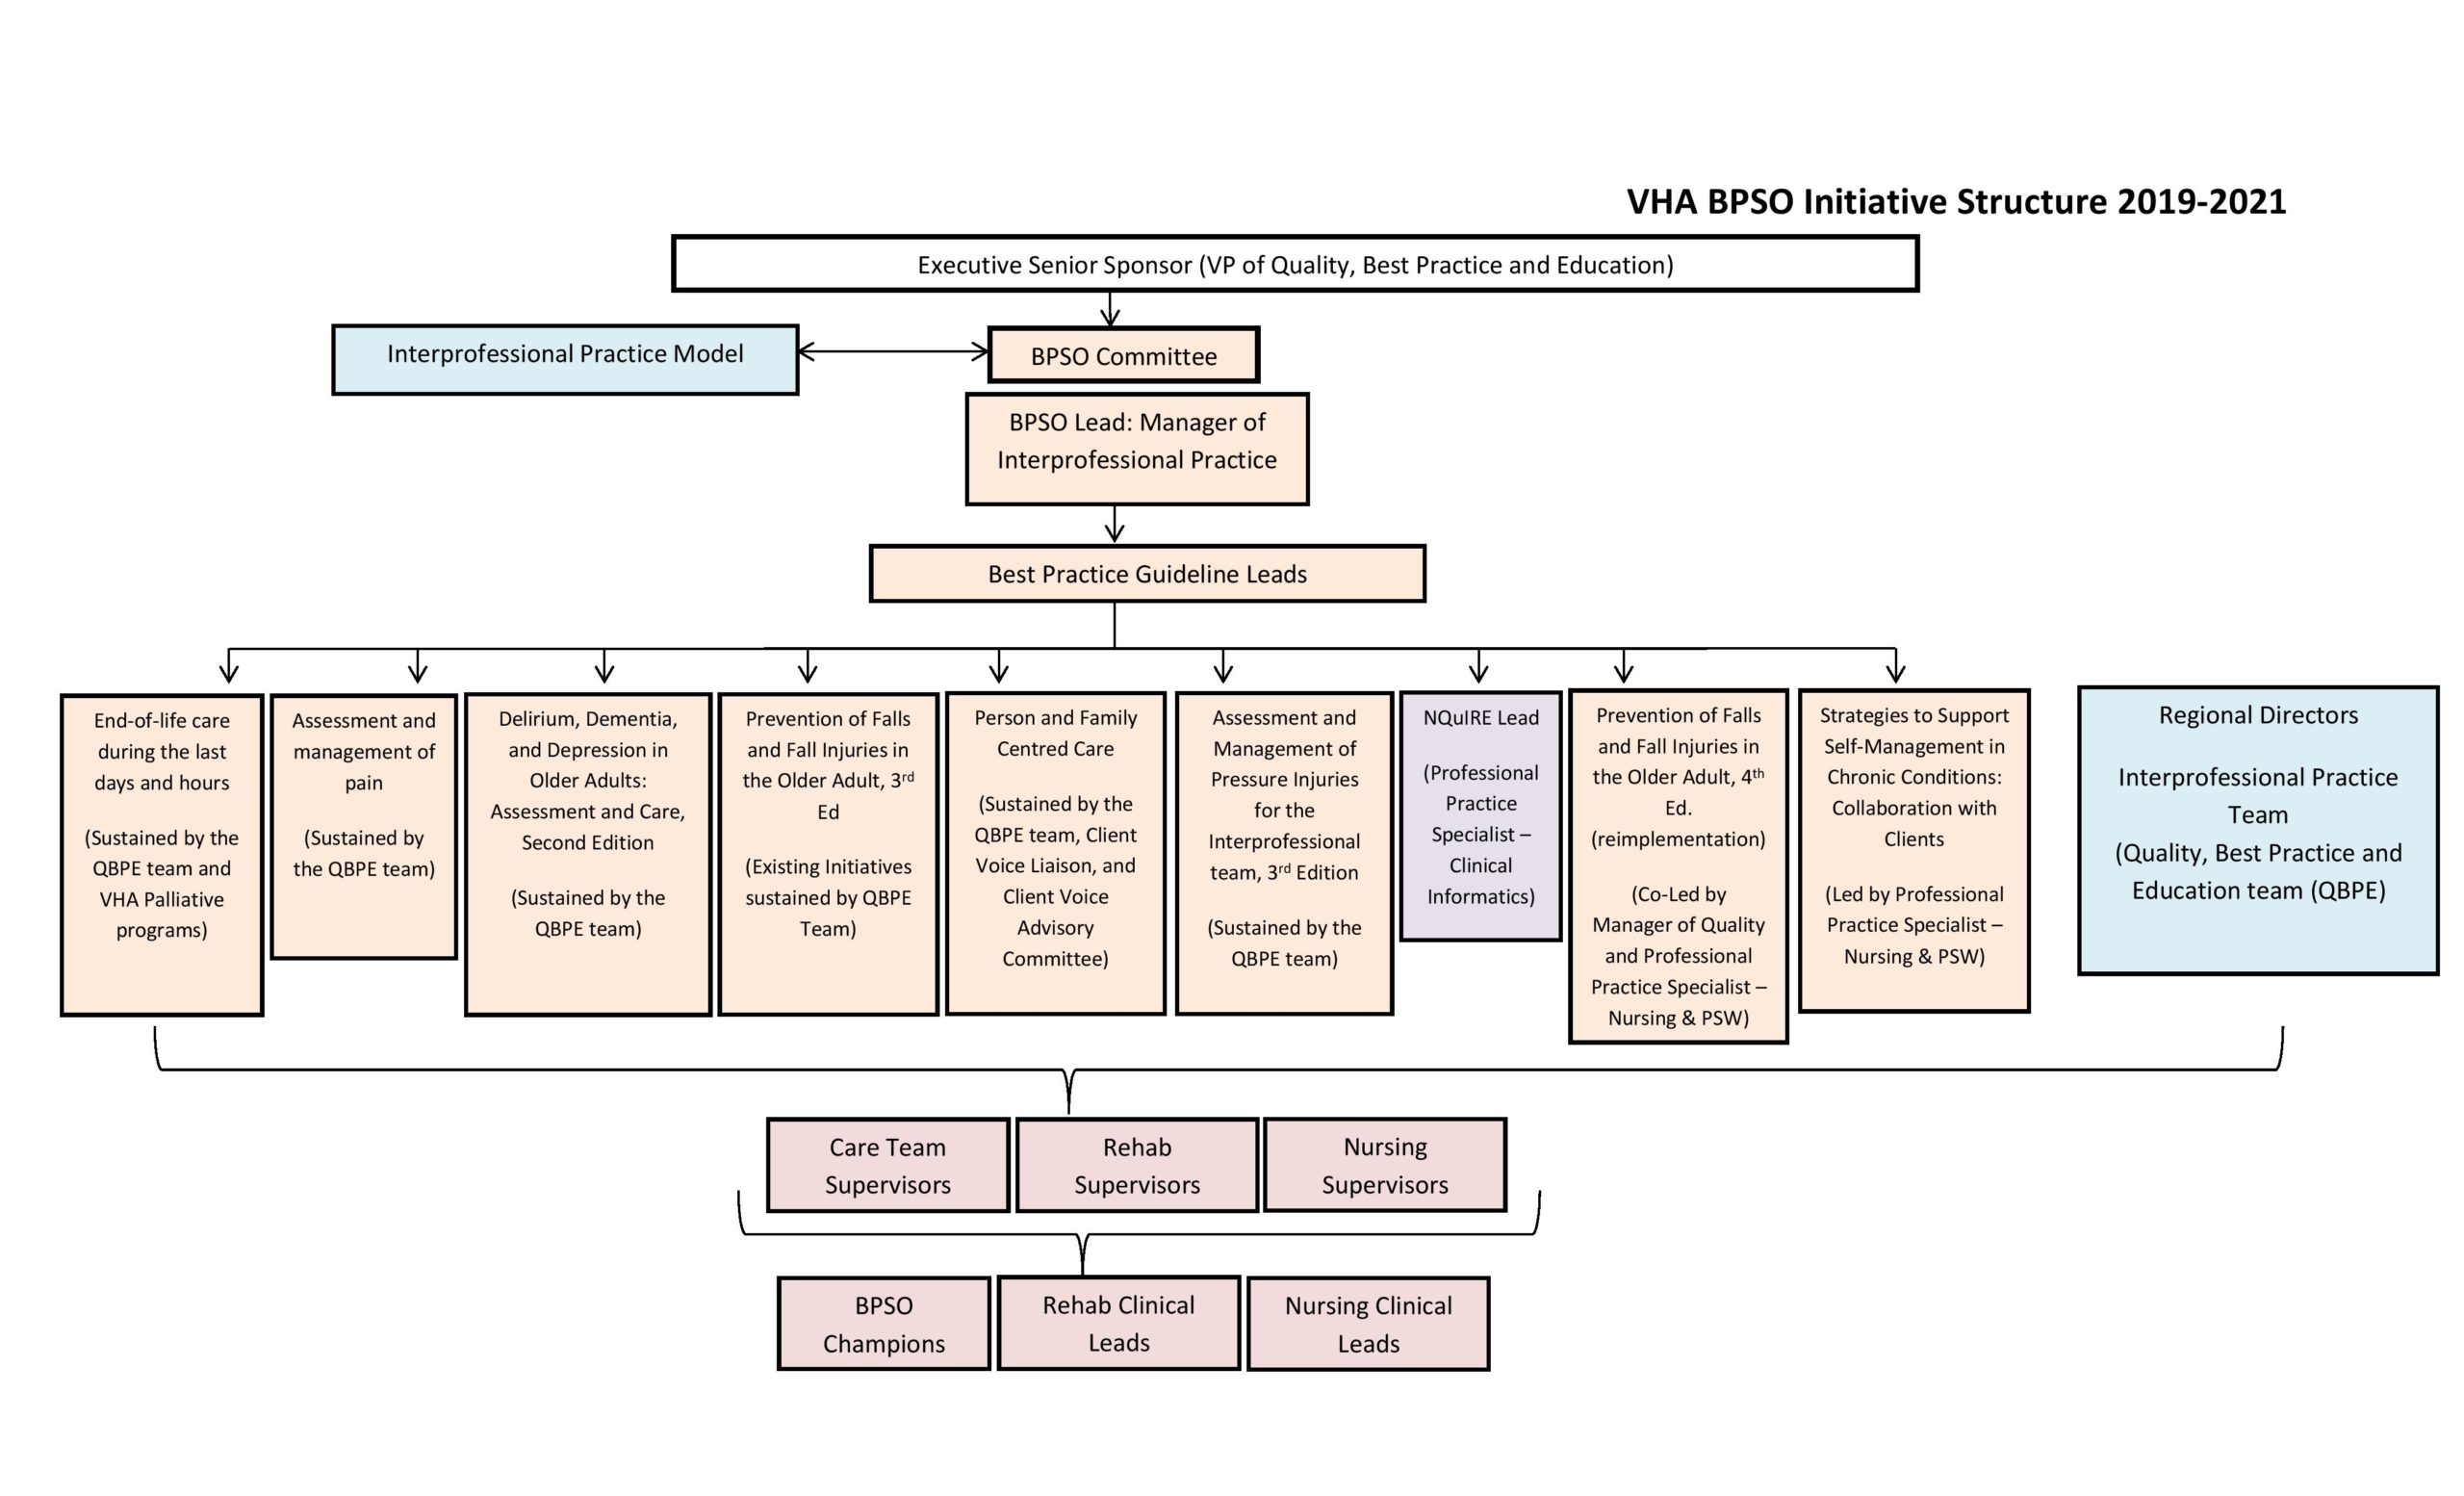 BPSO chart depicting organizational structure